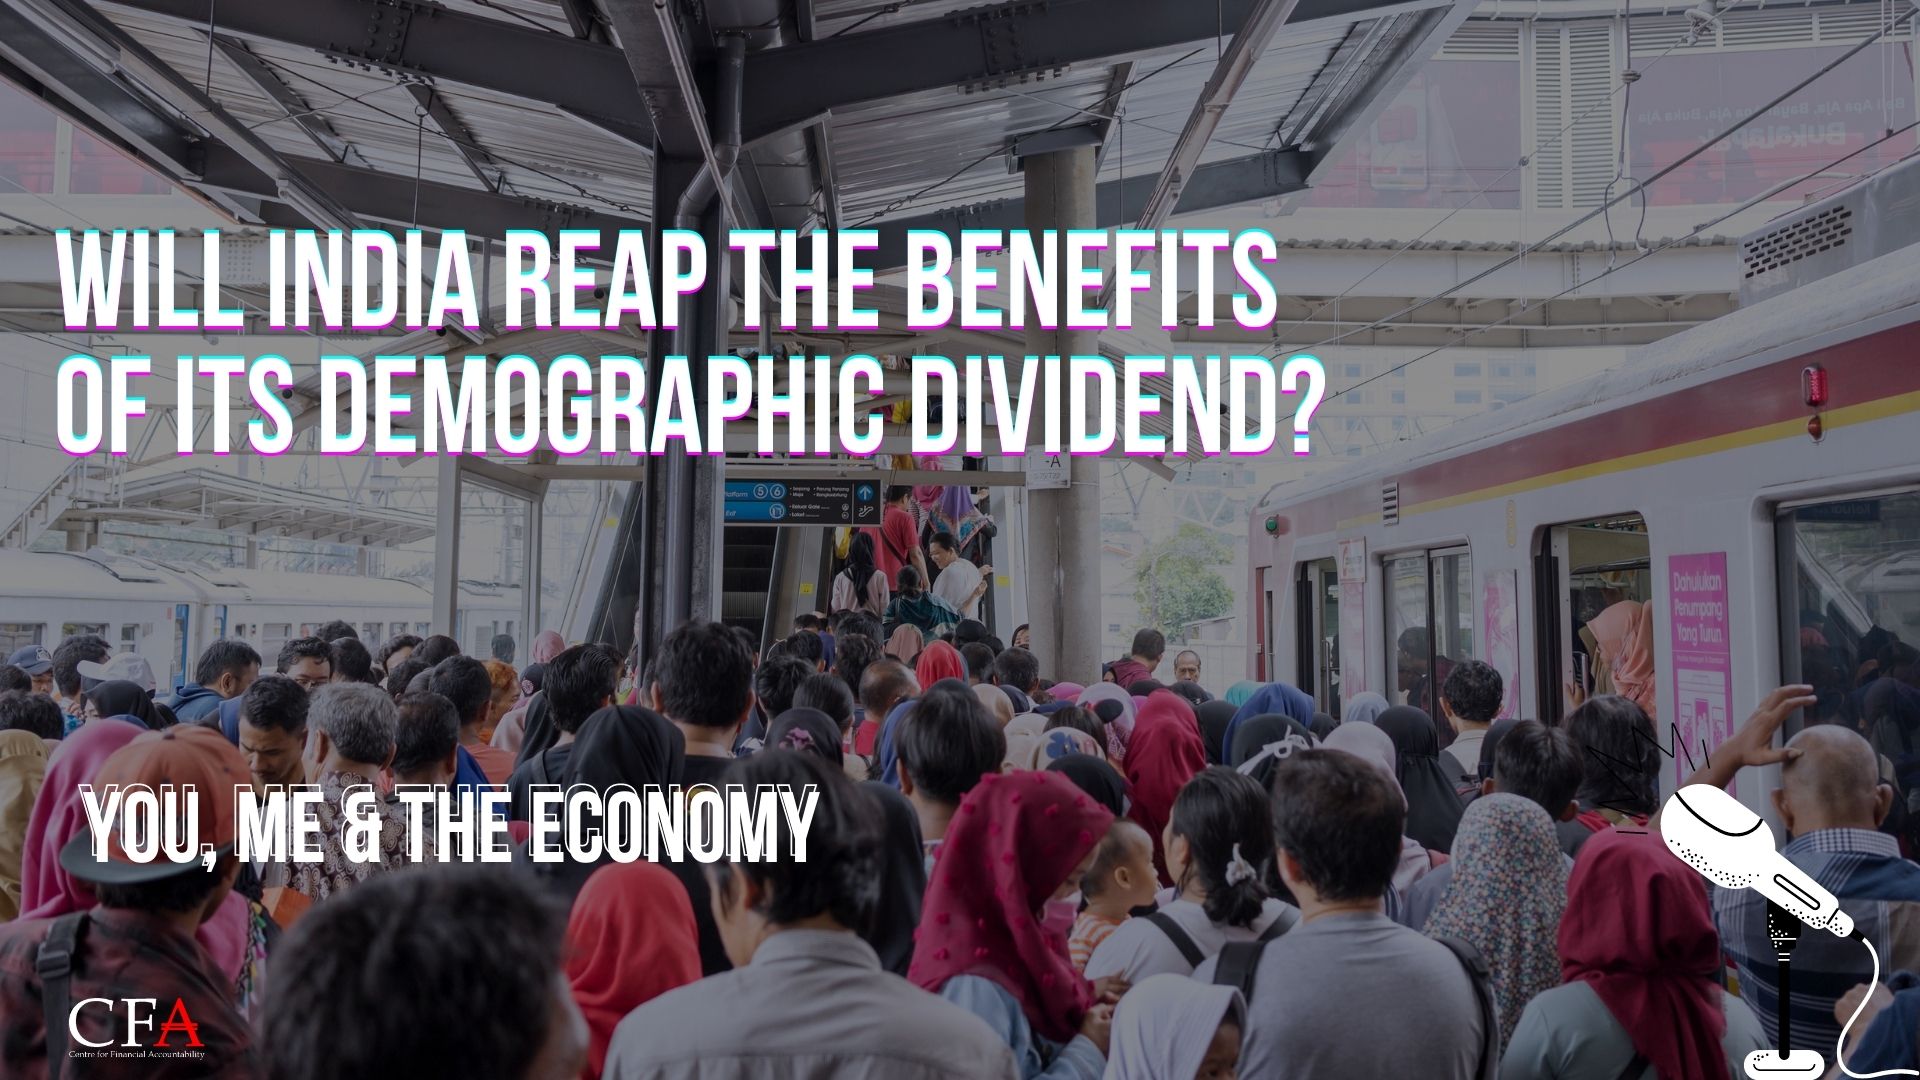 Will India Reap the Benefits of its Demographic Dividend?